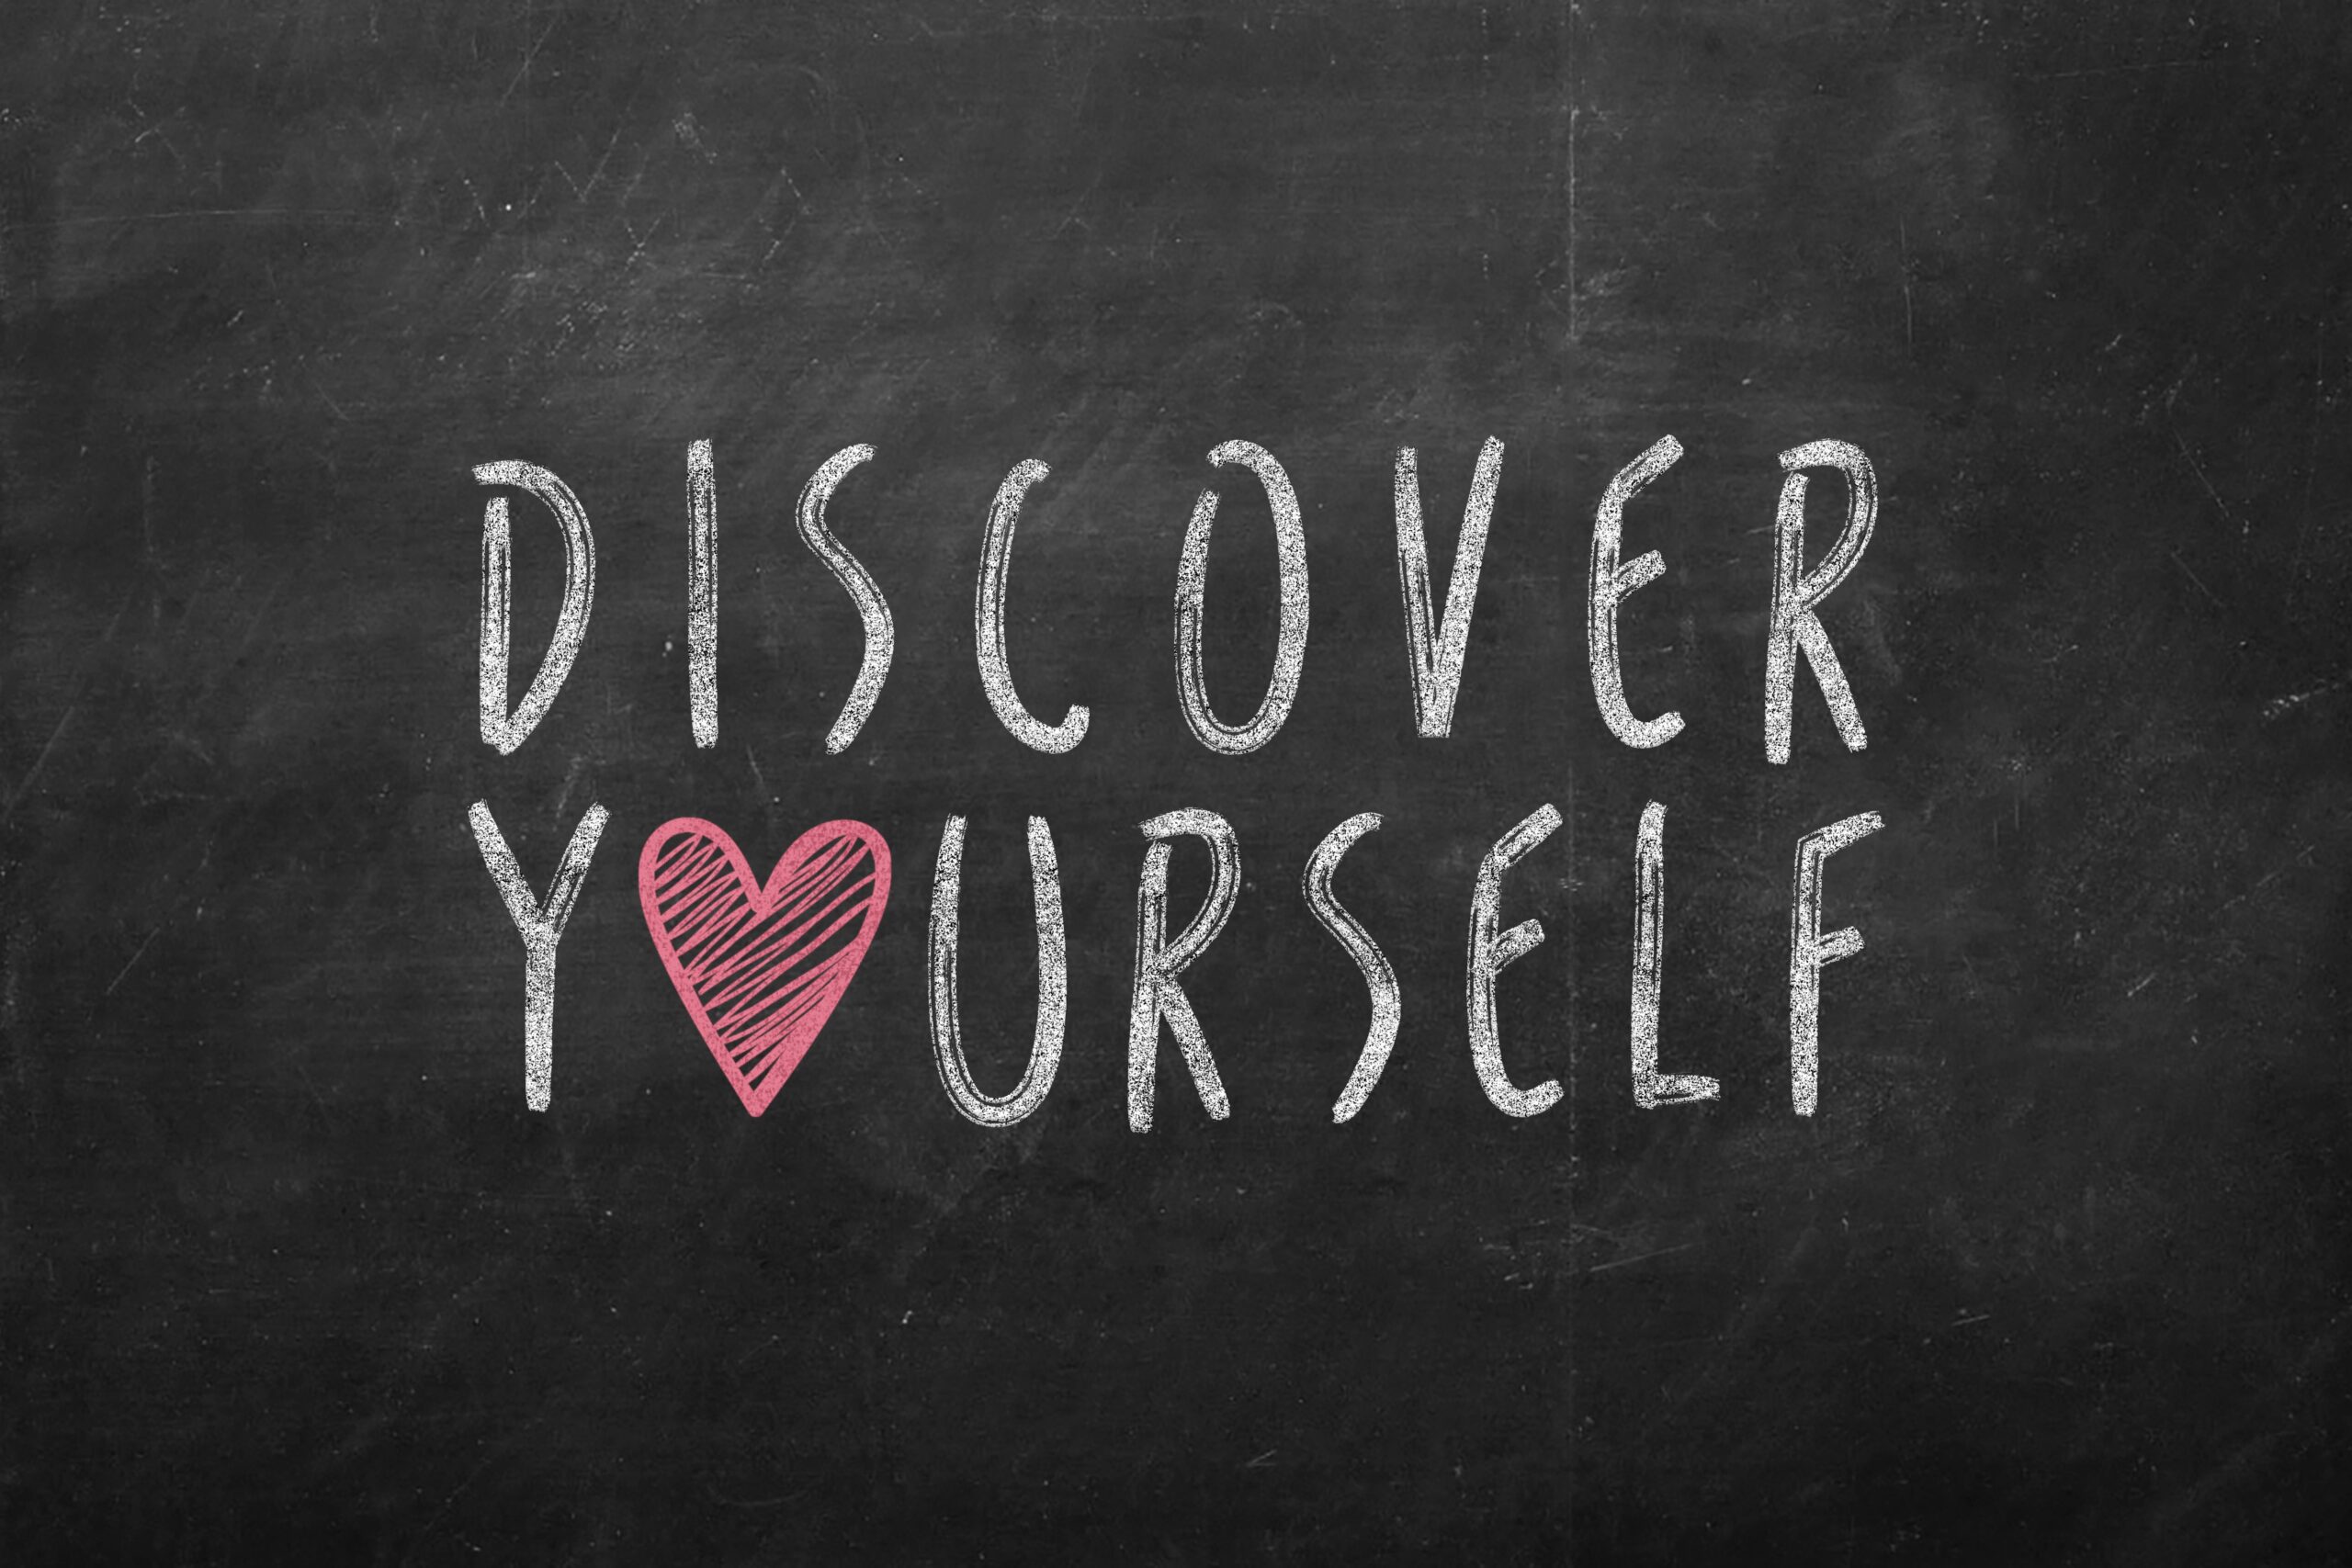 Embark on a Journey of Self-Discovery to Understand Others